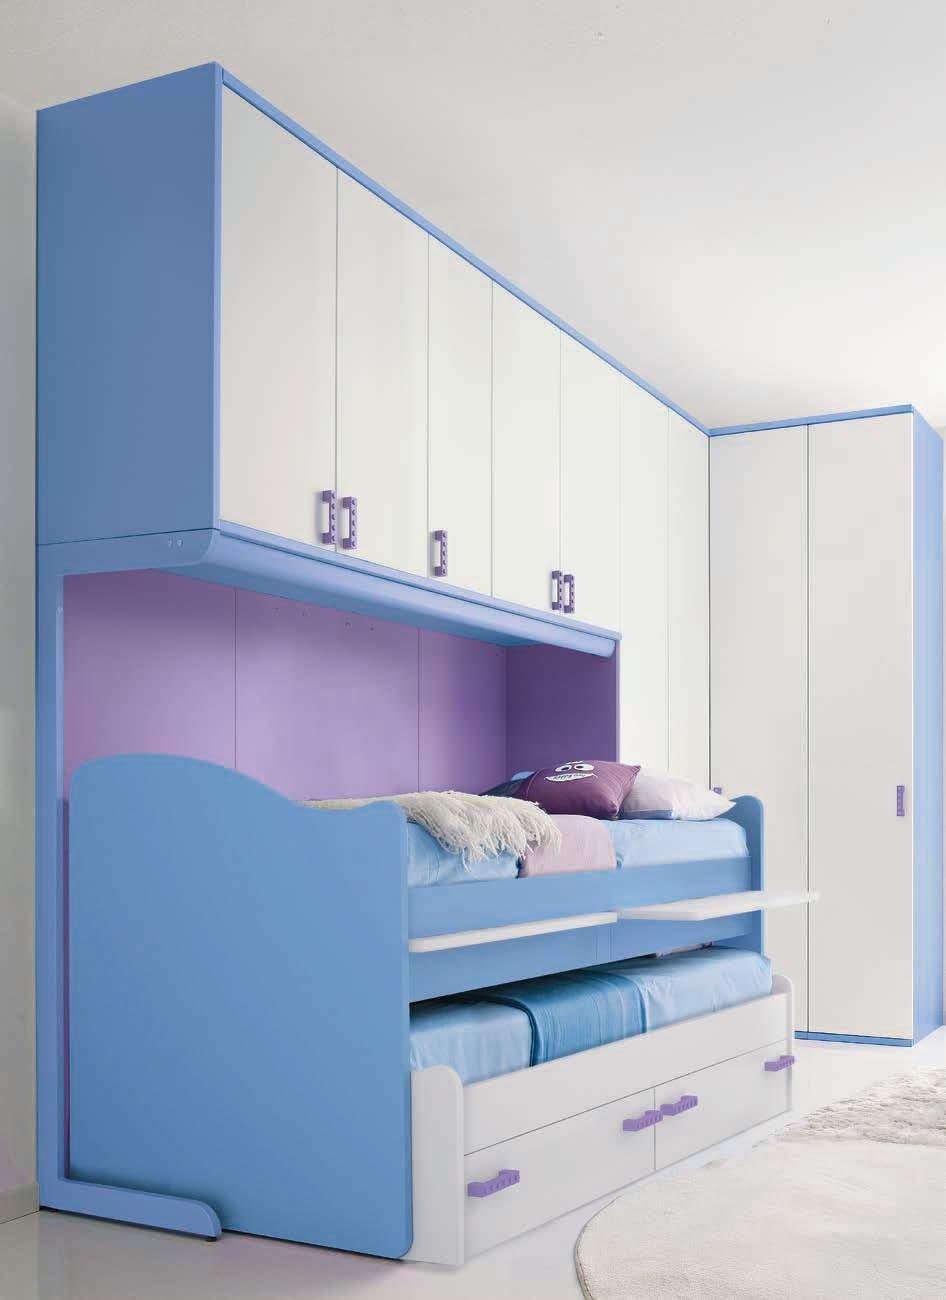 VARIANTE LETTO MULTIFUNZIONE BED MULTIFUNCTIONAL VARIATION variante